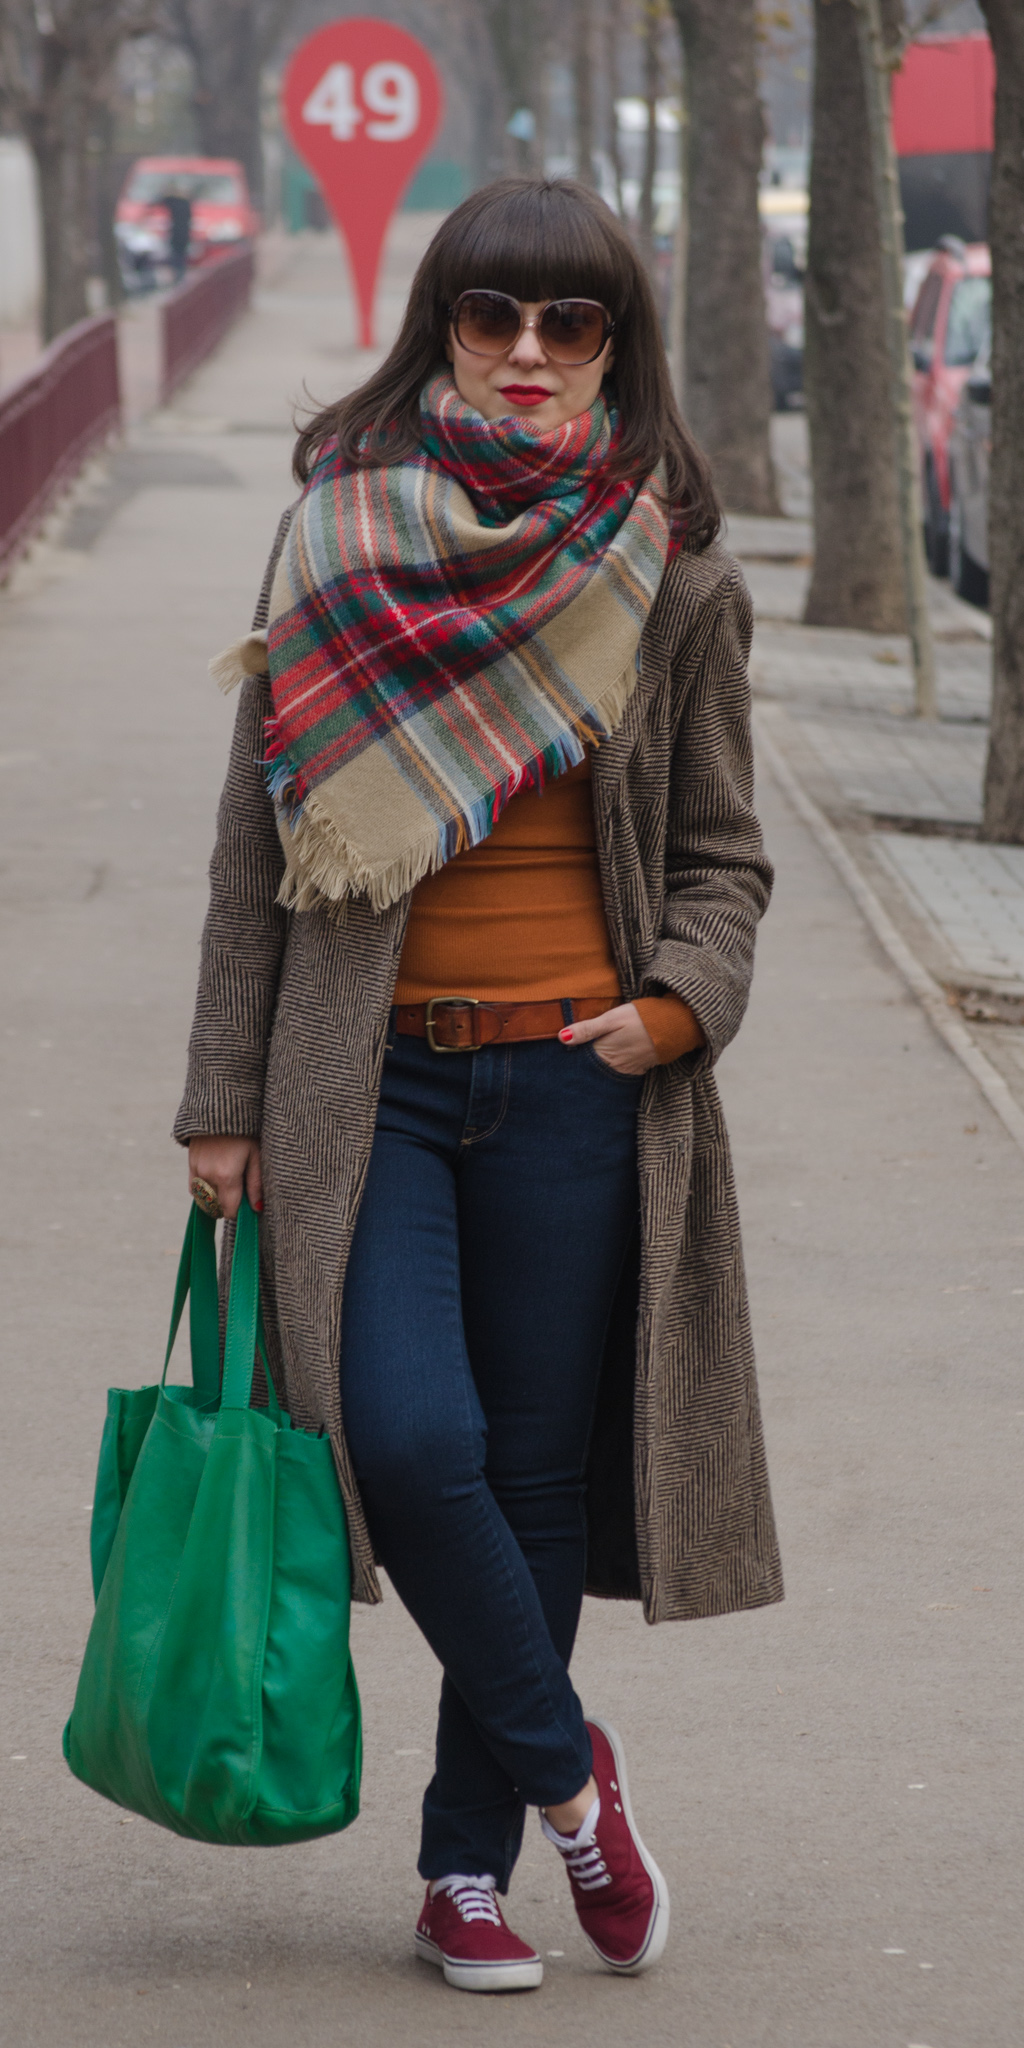 clasic brown fall coat thrifted burgundy h&m sneakers burnt orange turtleneck over-sized scarf colorful green red christmas bag zara indigo jeans skinny bangs hair